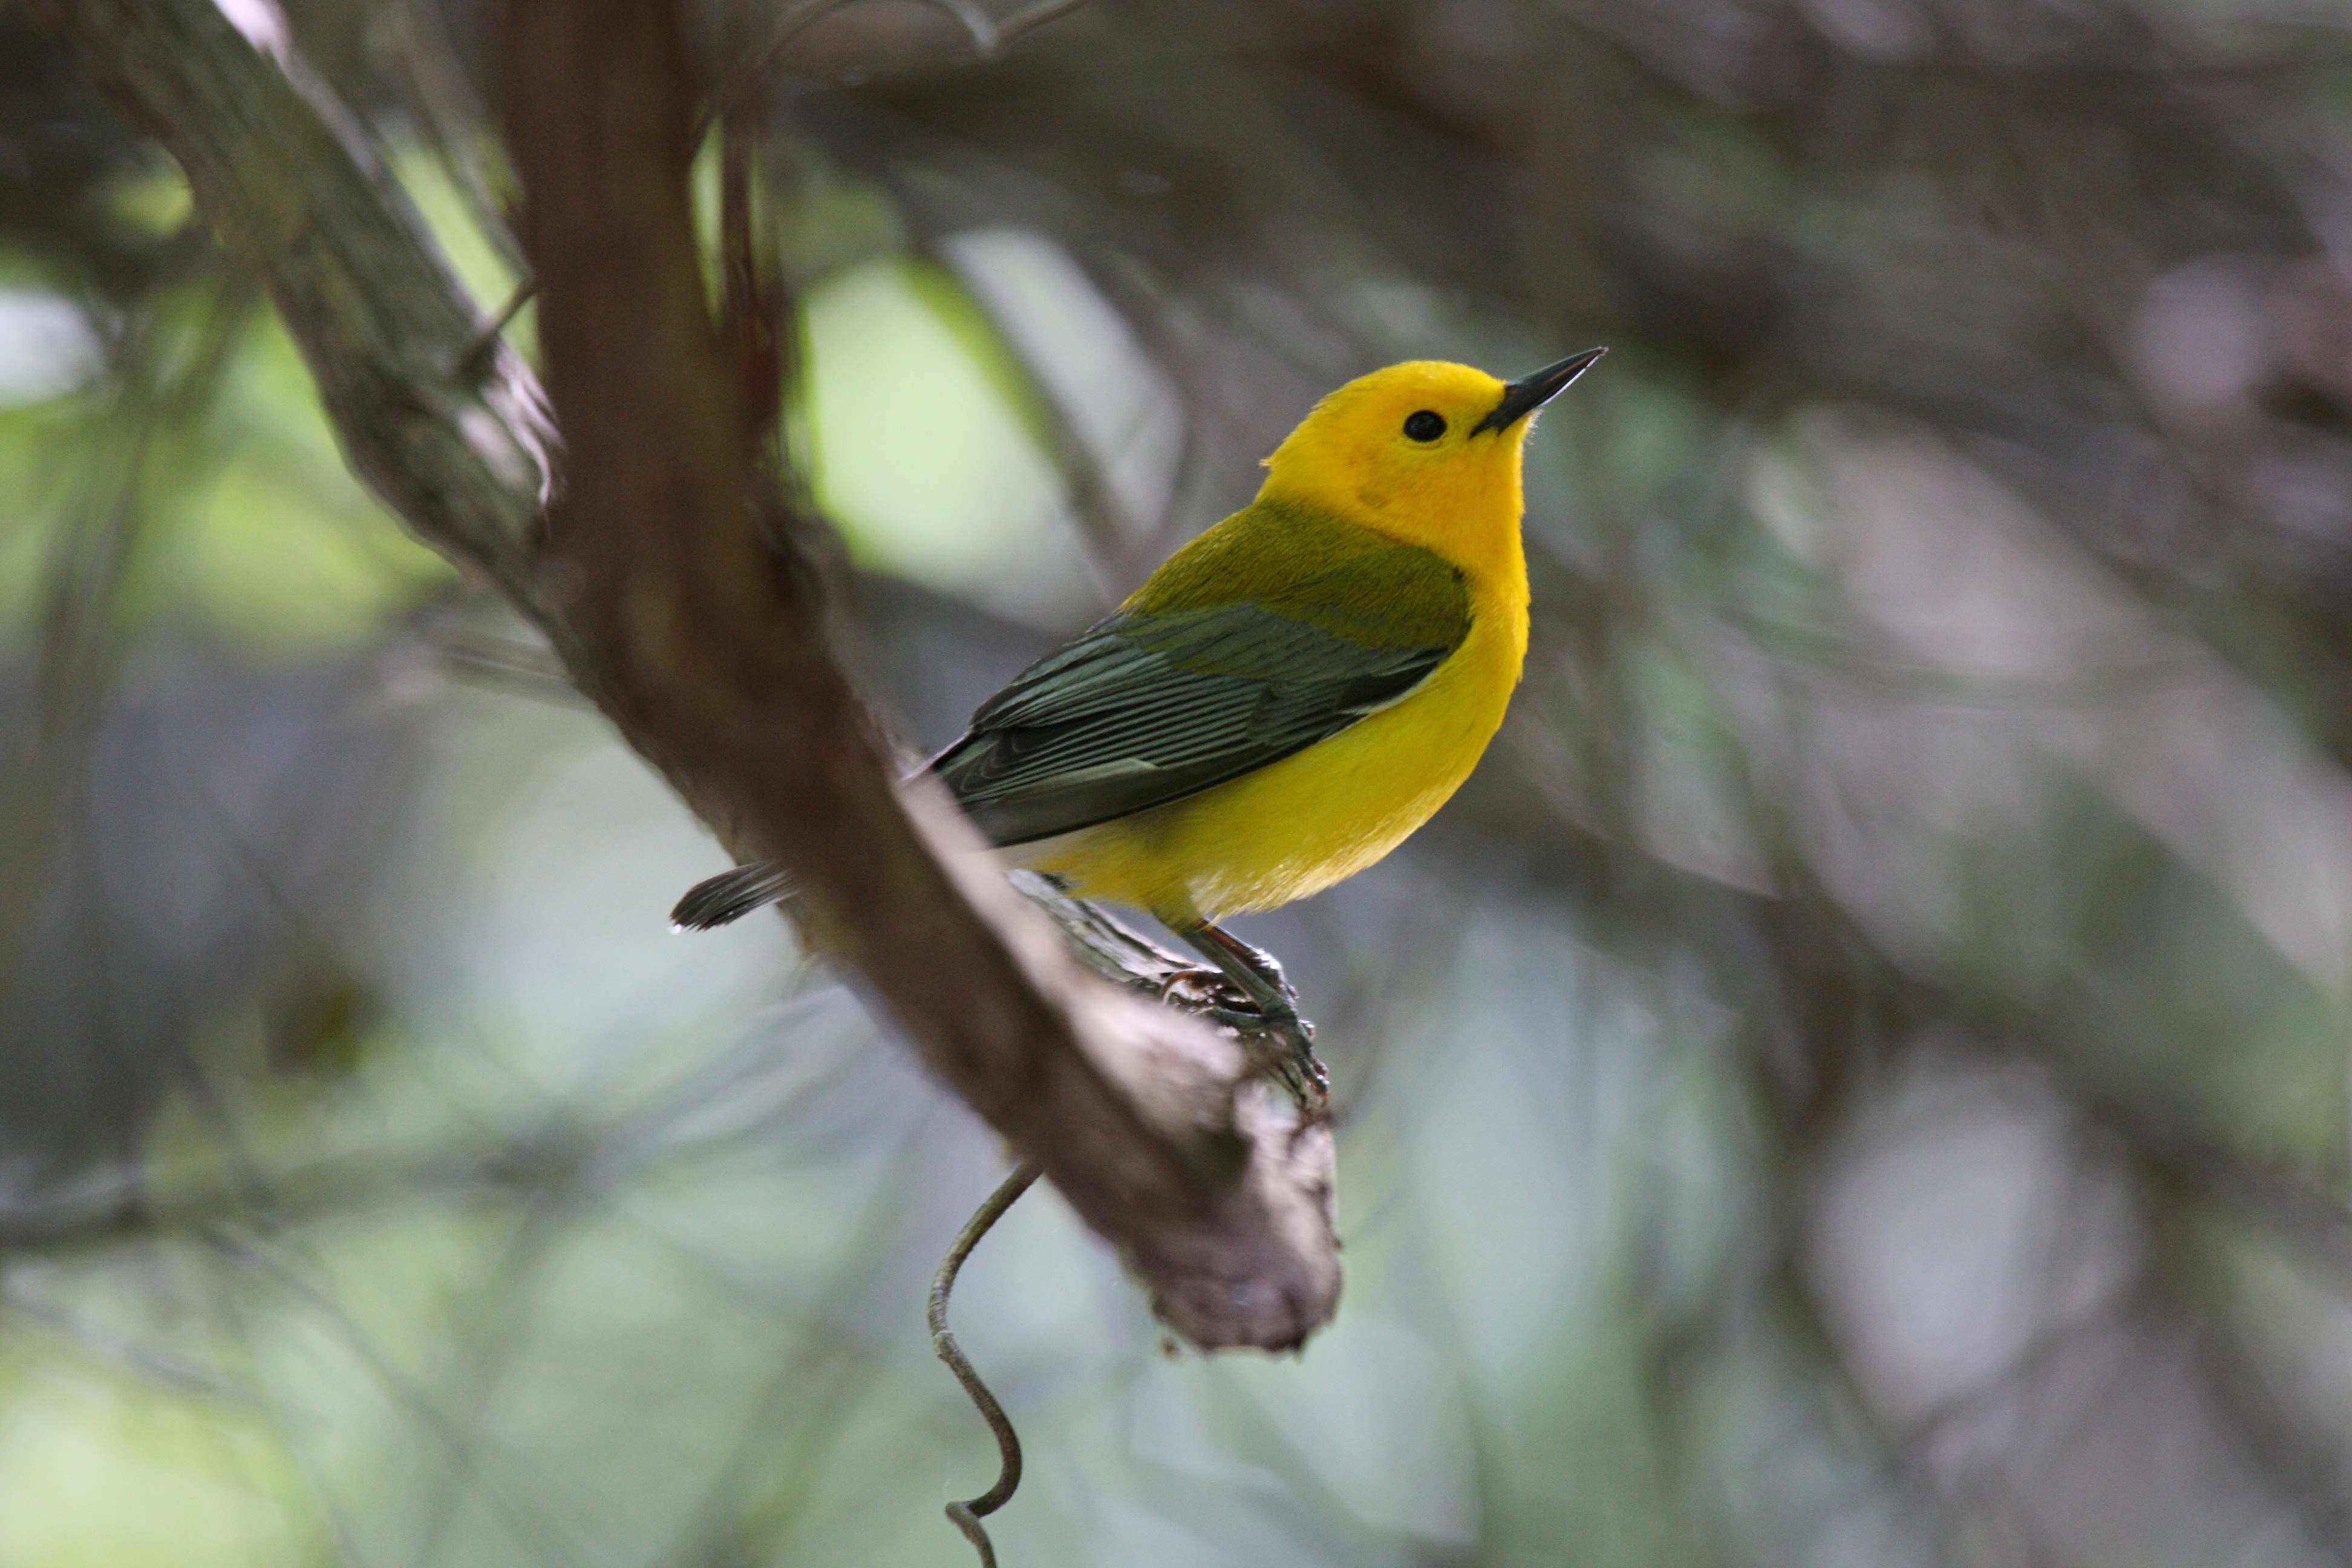 File:Prothonotary Warbler.jpg - Wikimedia Commons